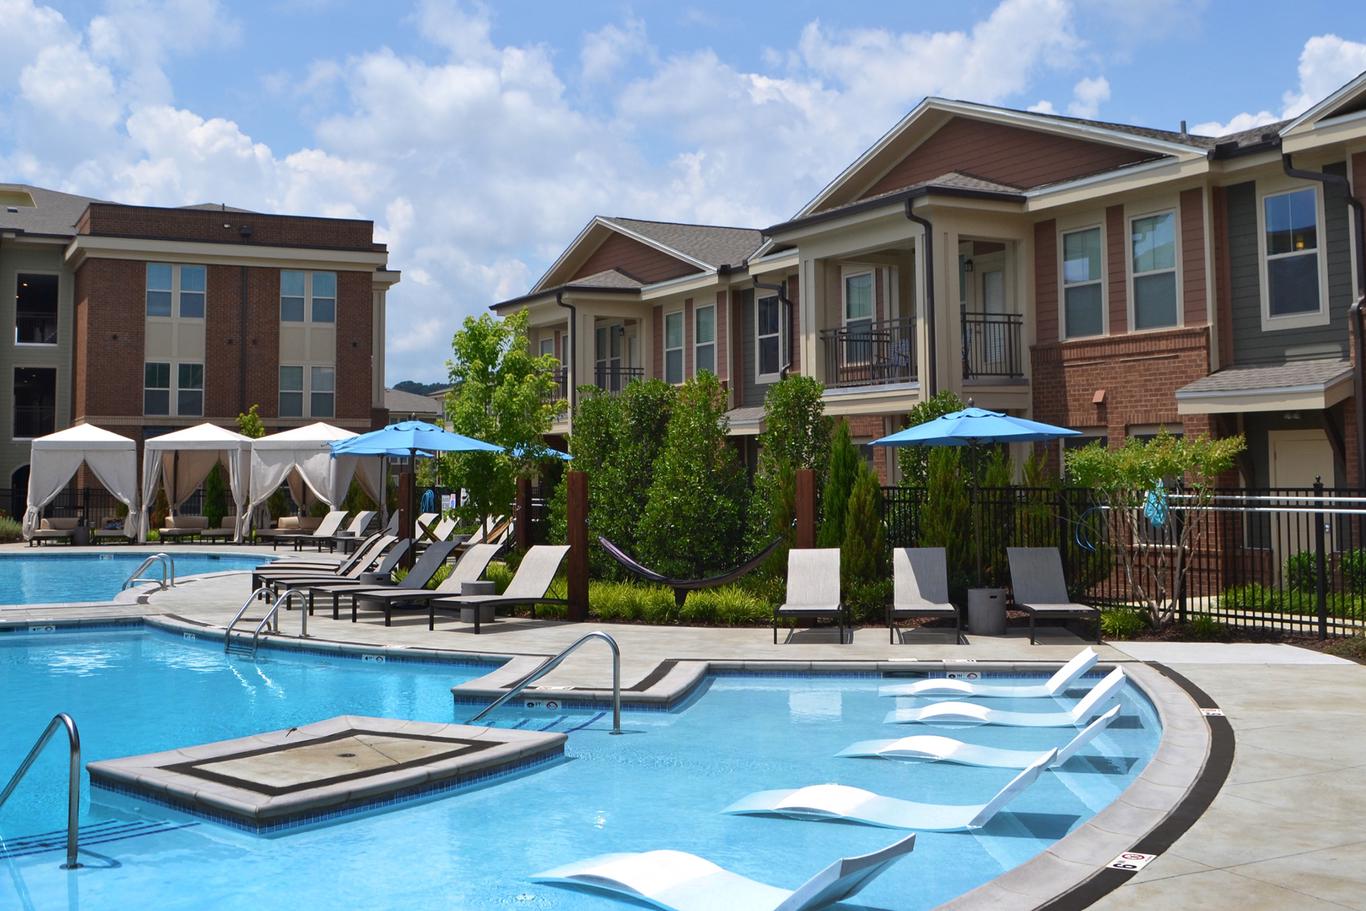 Pool area at Novel Bellevue Place, an amenity-rich master-planned community designed by EDGE.